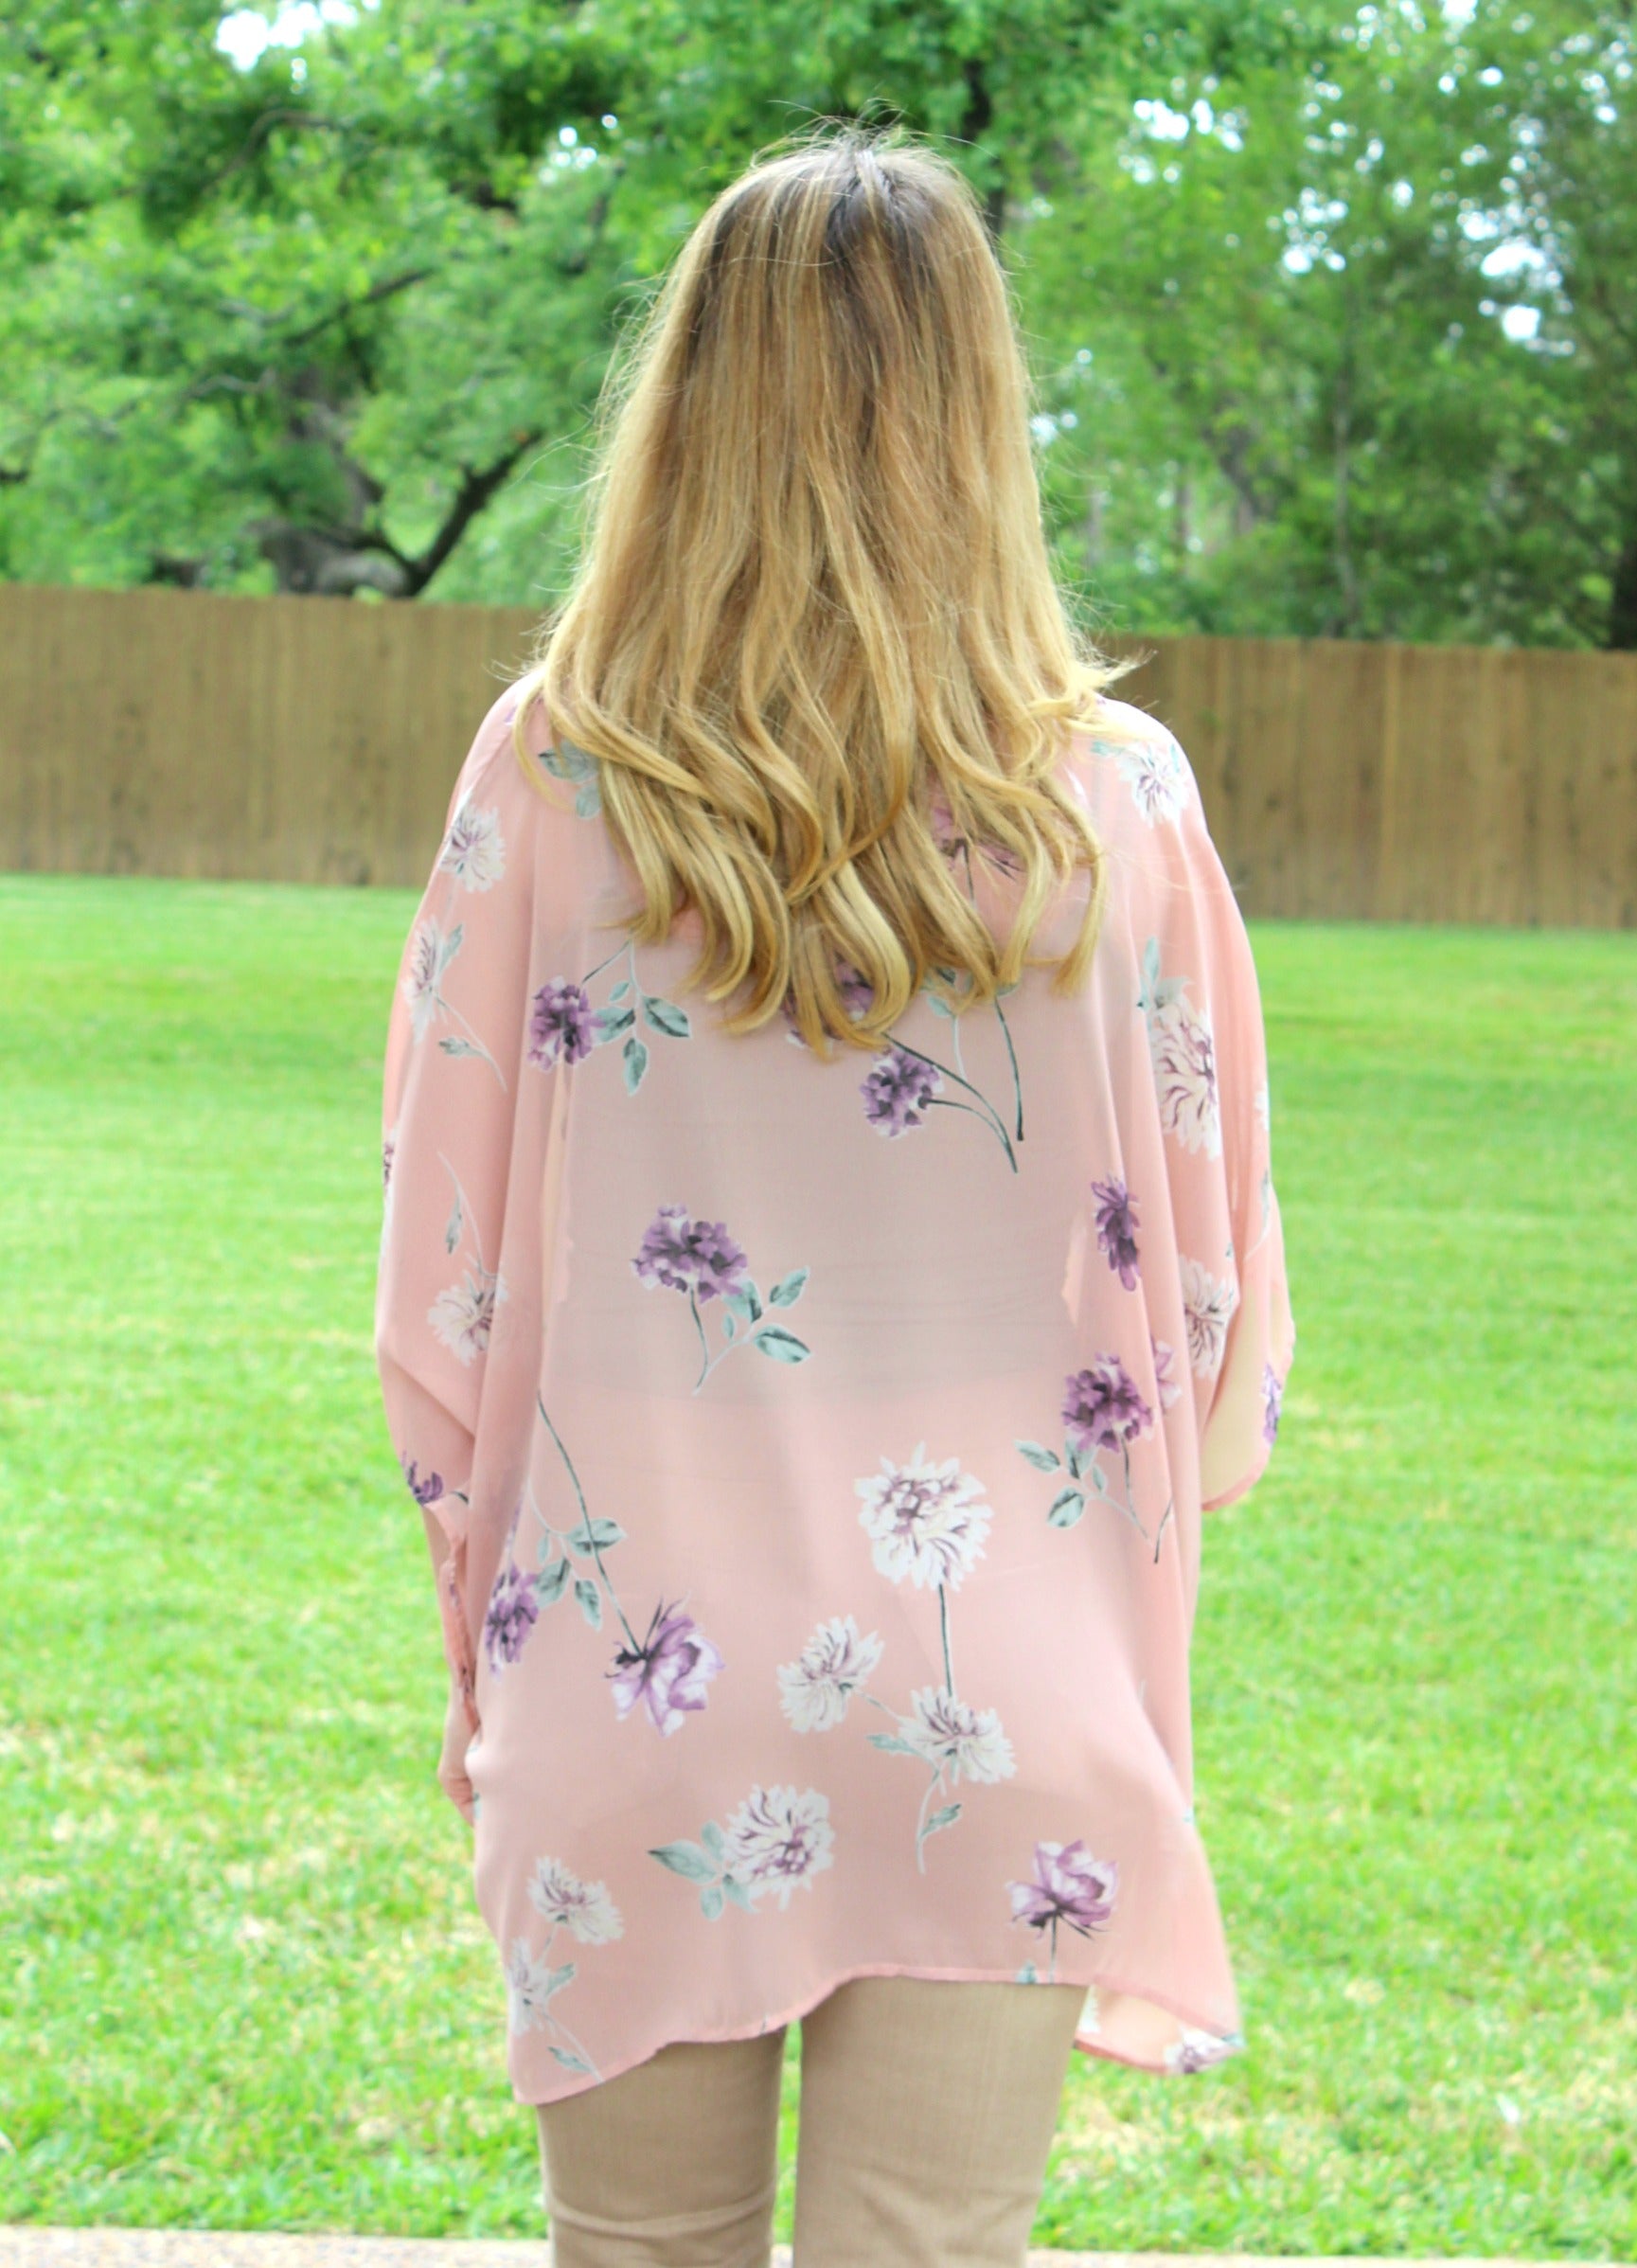 Sure Thing Sheer Floral Print Oversized Poncho Top in Dusty Pink - Giddy Up Glamour Boutique